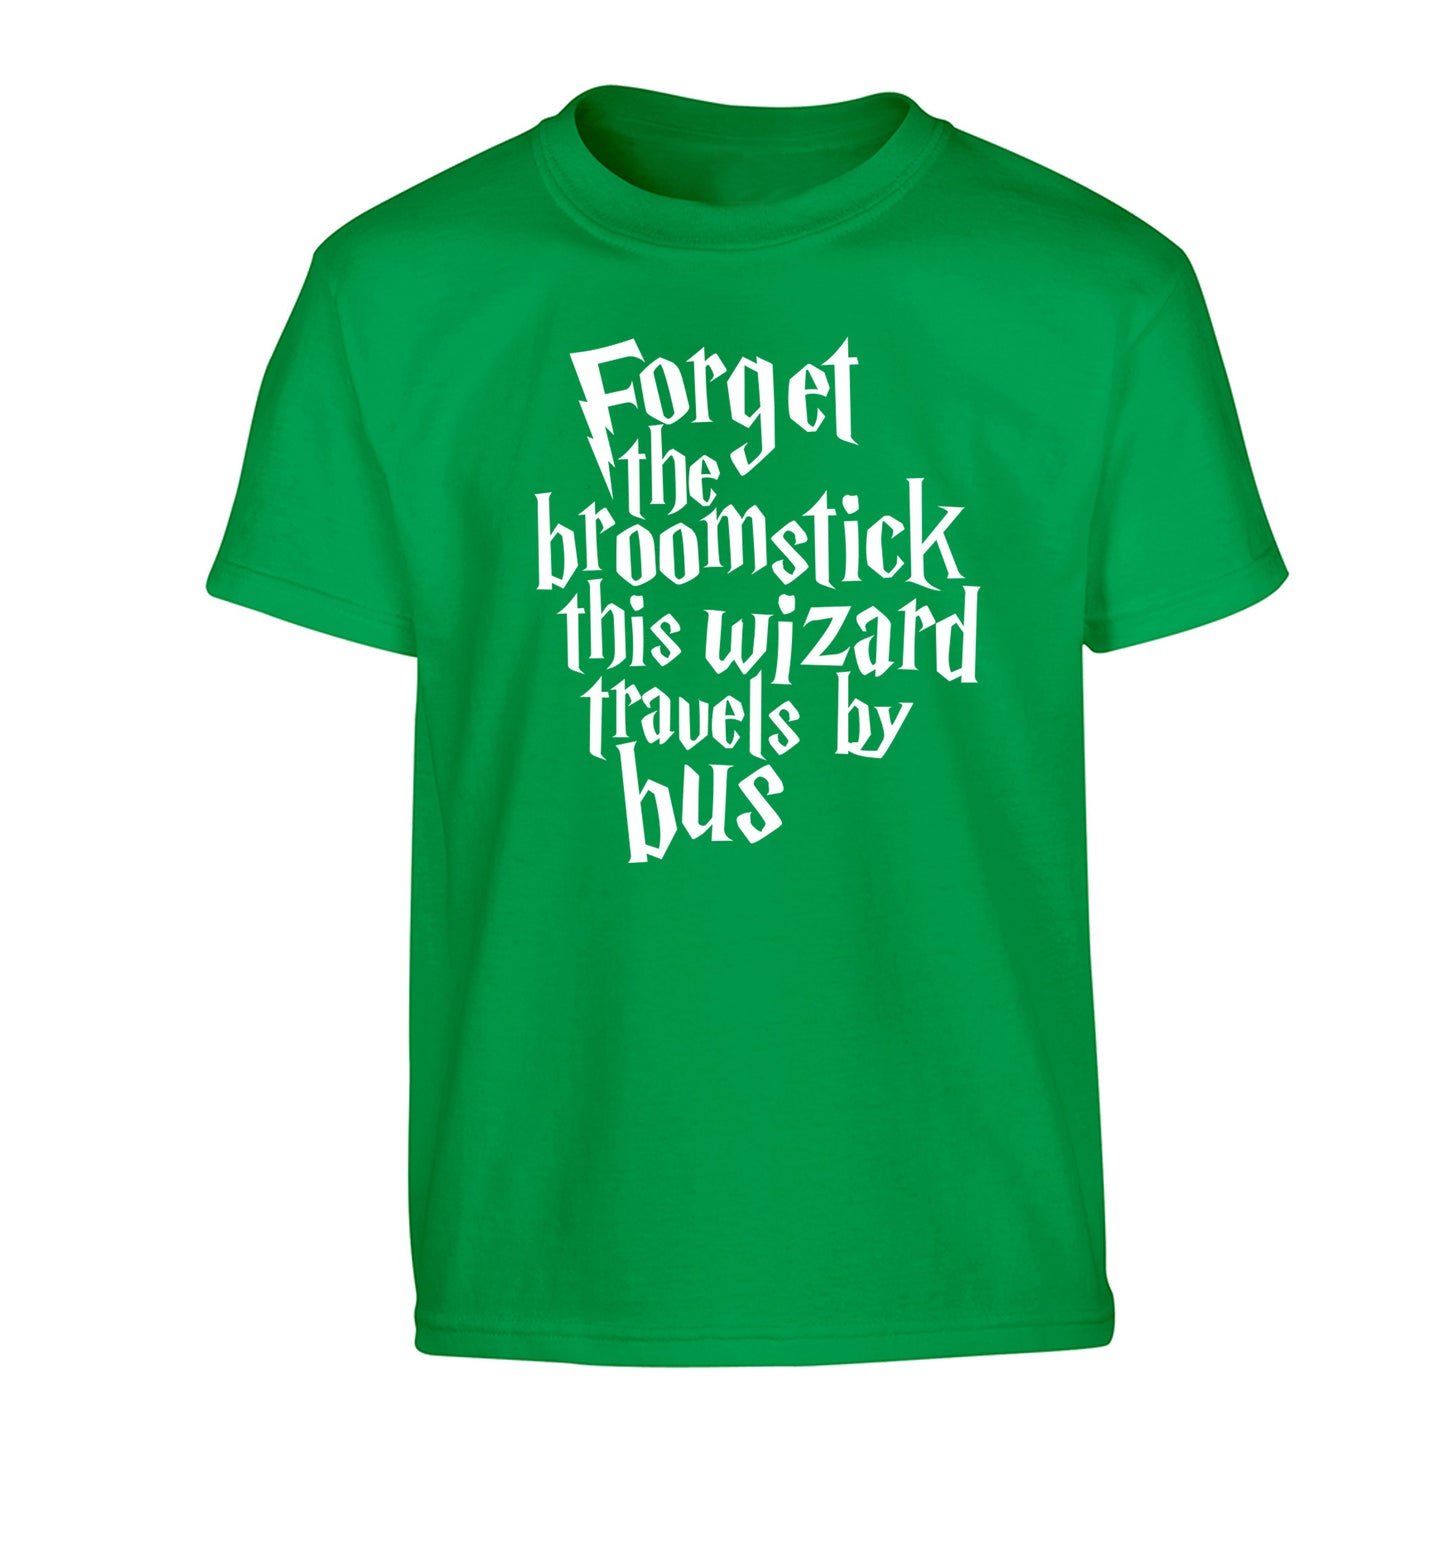 Forget the broomstick this wizard travels by bus Children's green Tshirt 12-14 Years